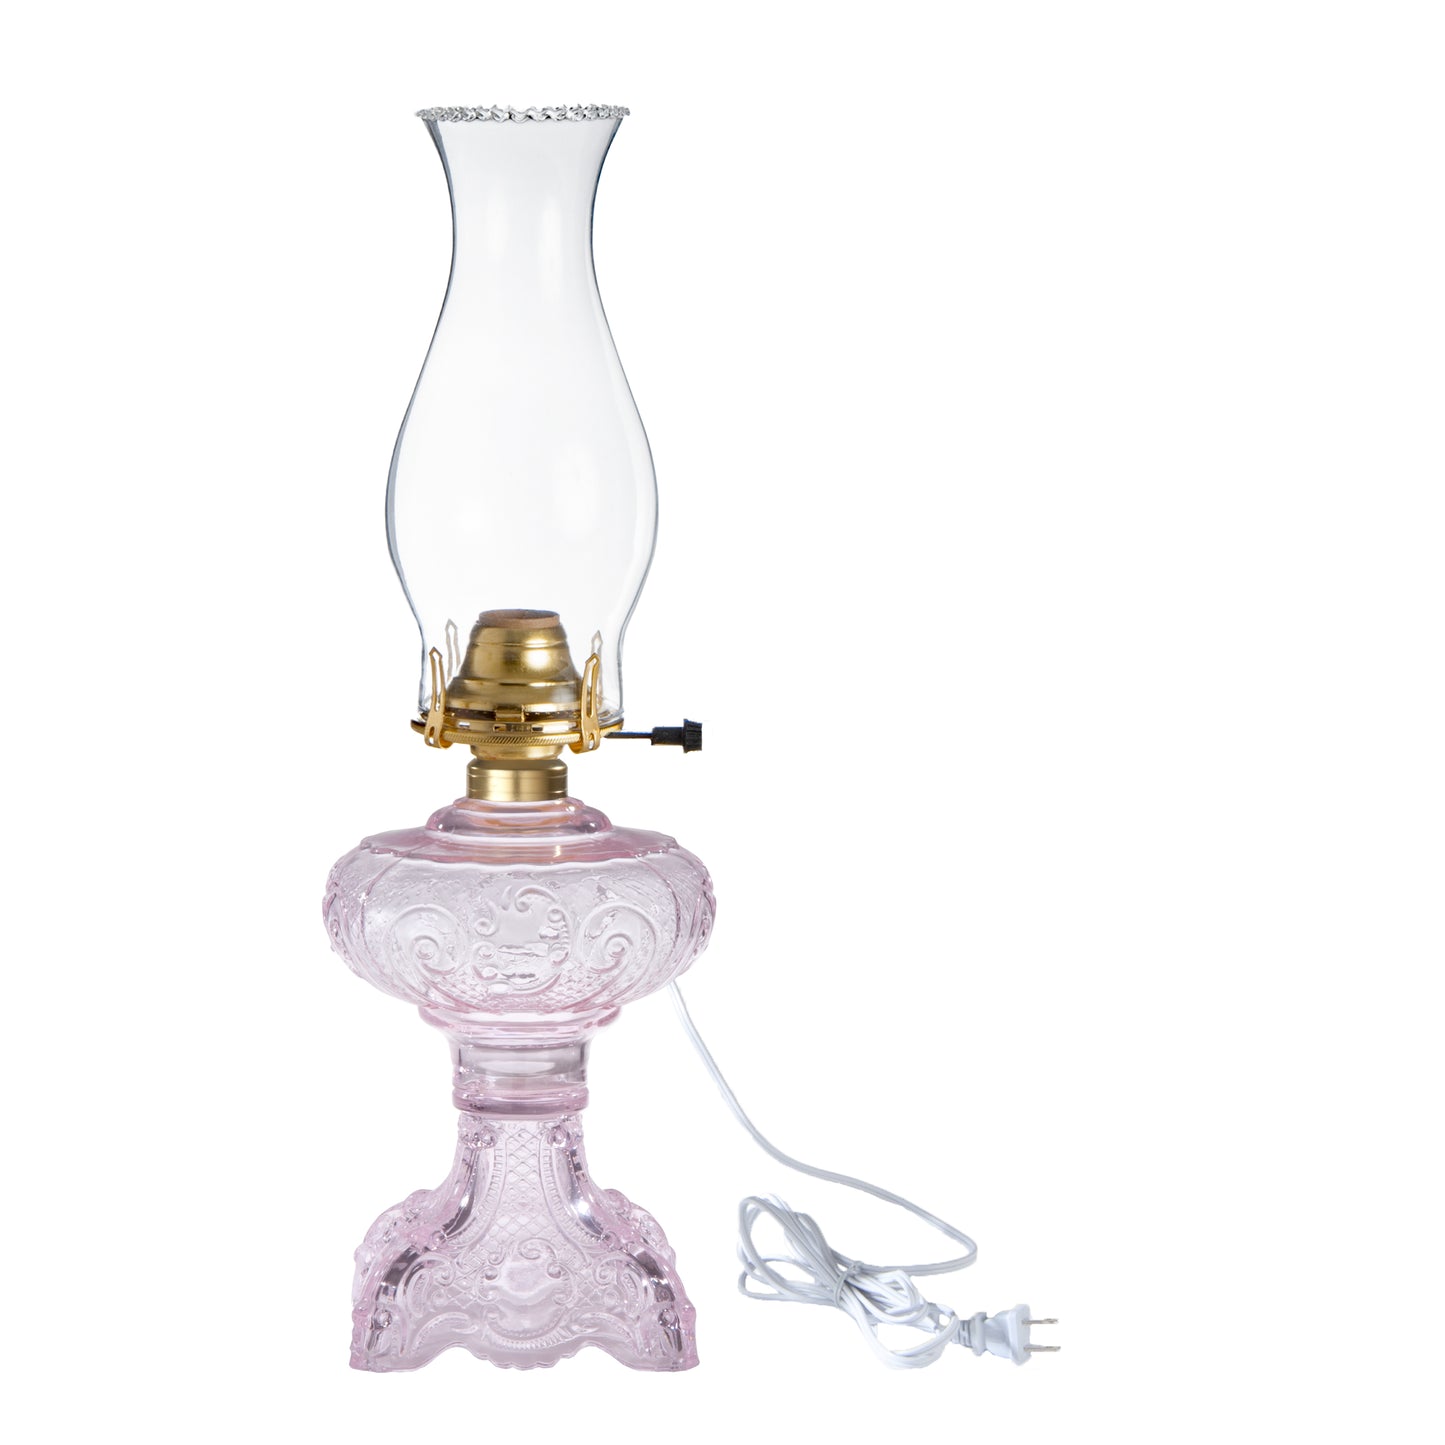 Electric Princess Feather Oil Lamps Complete with Electric Burner and Chimney (66499E)